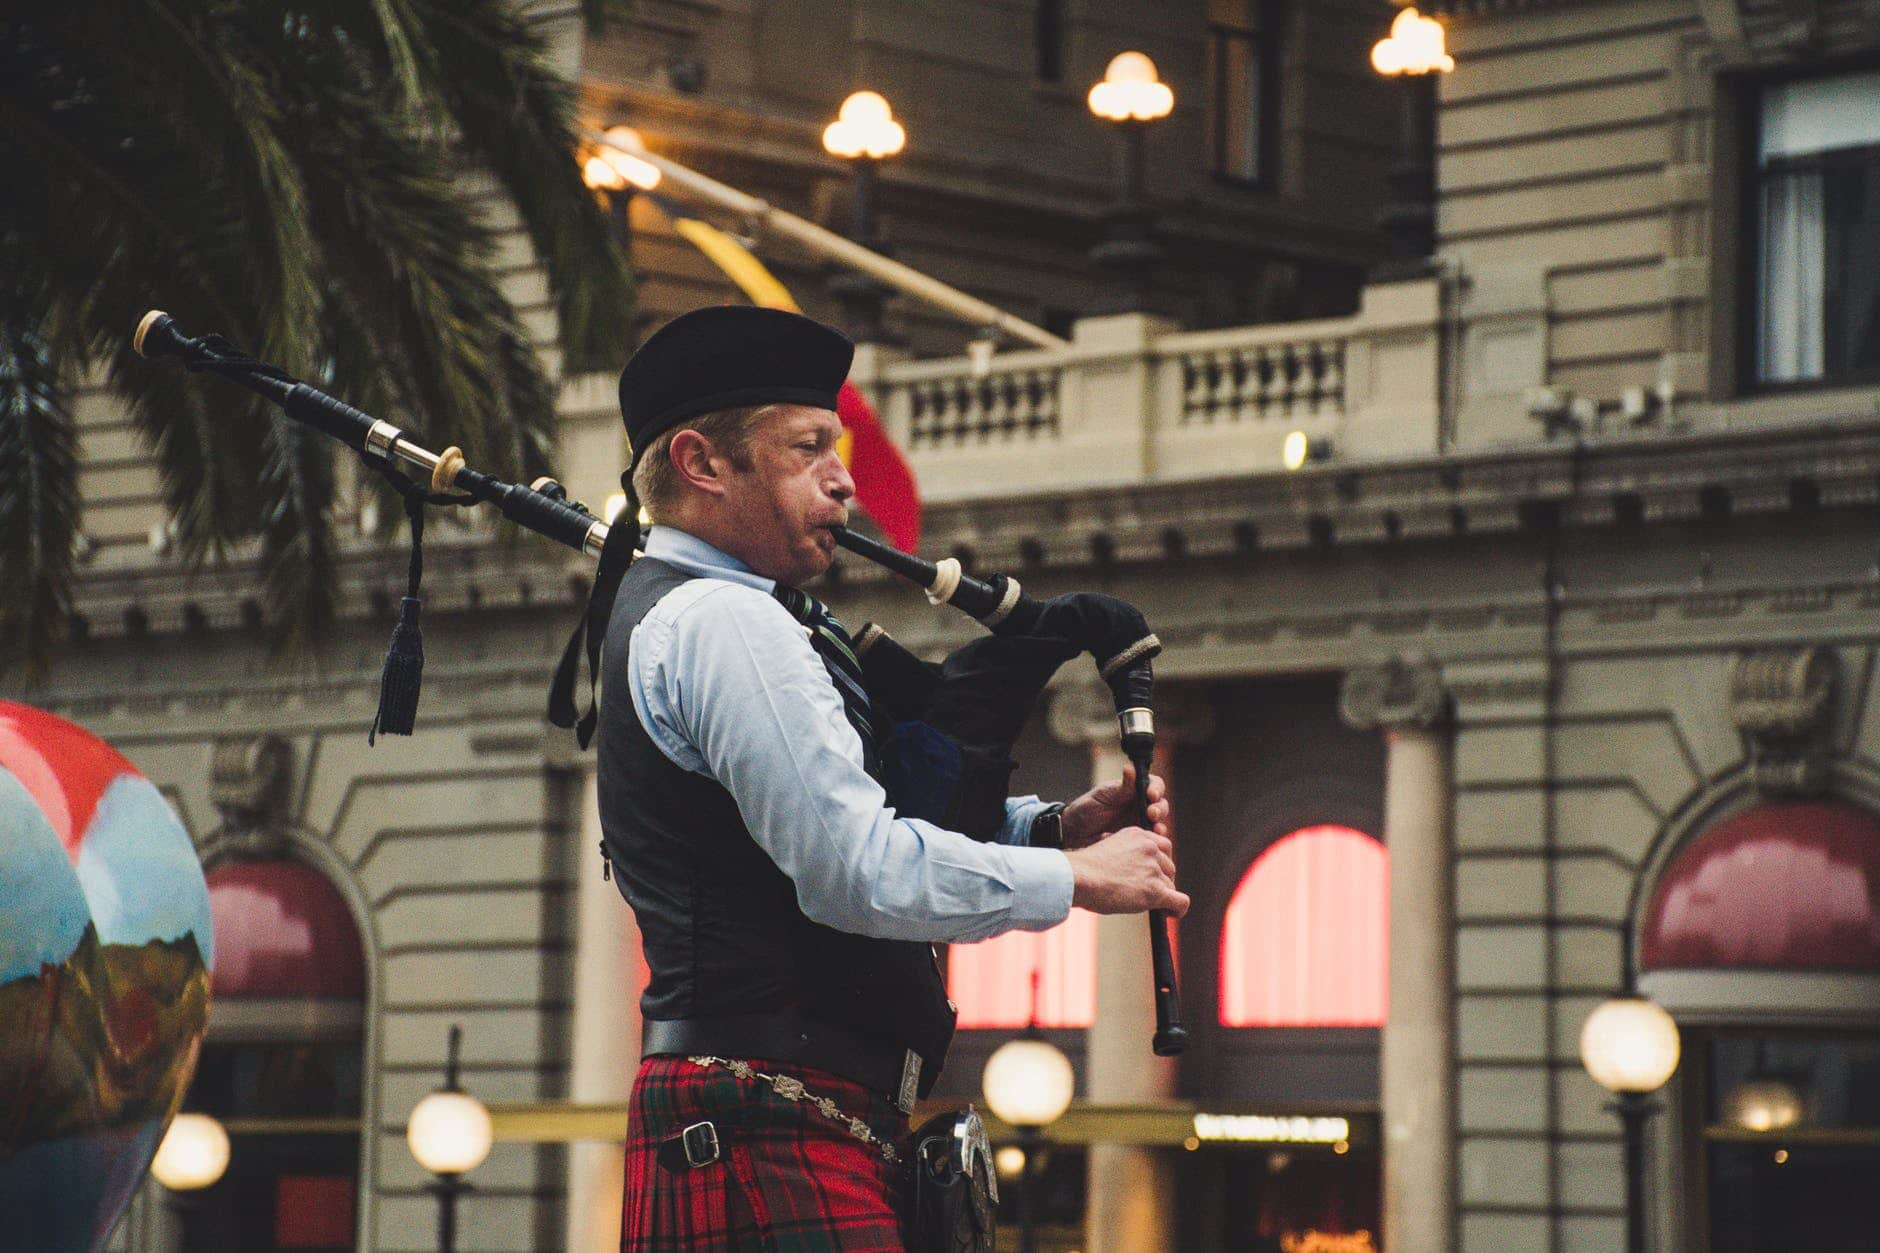 A person playing bagpipes in a building